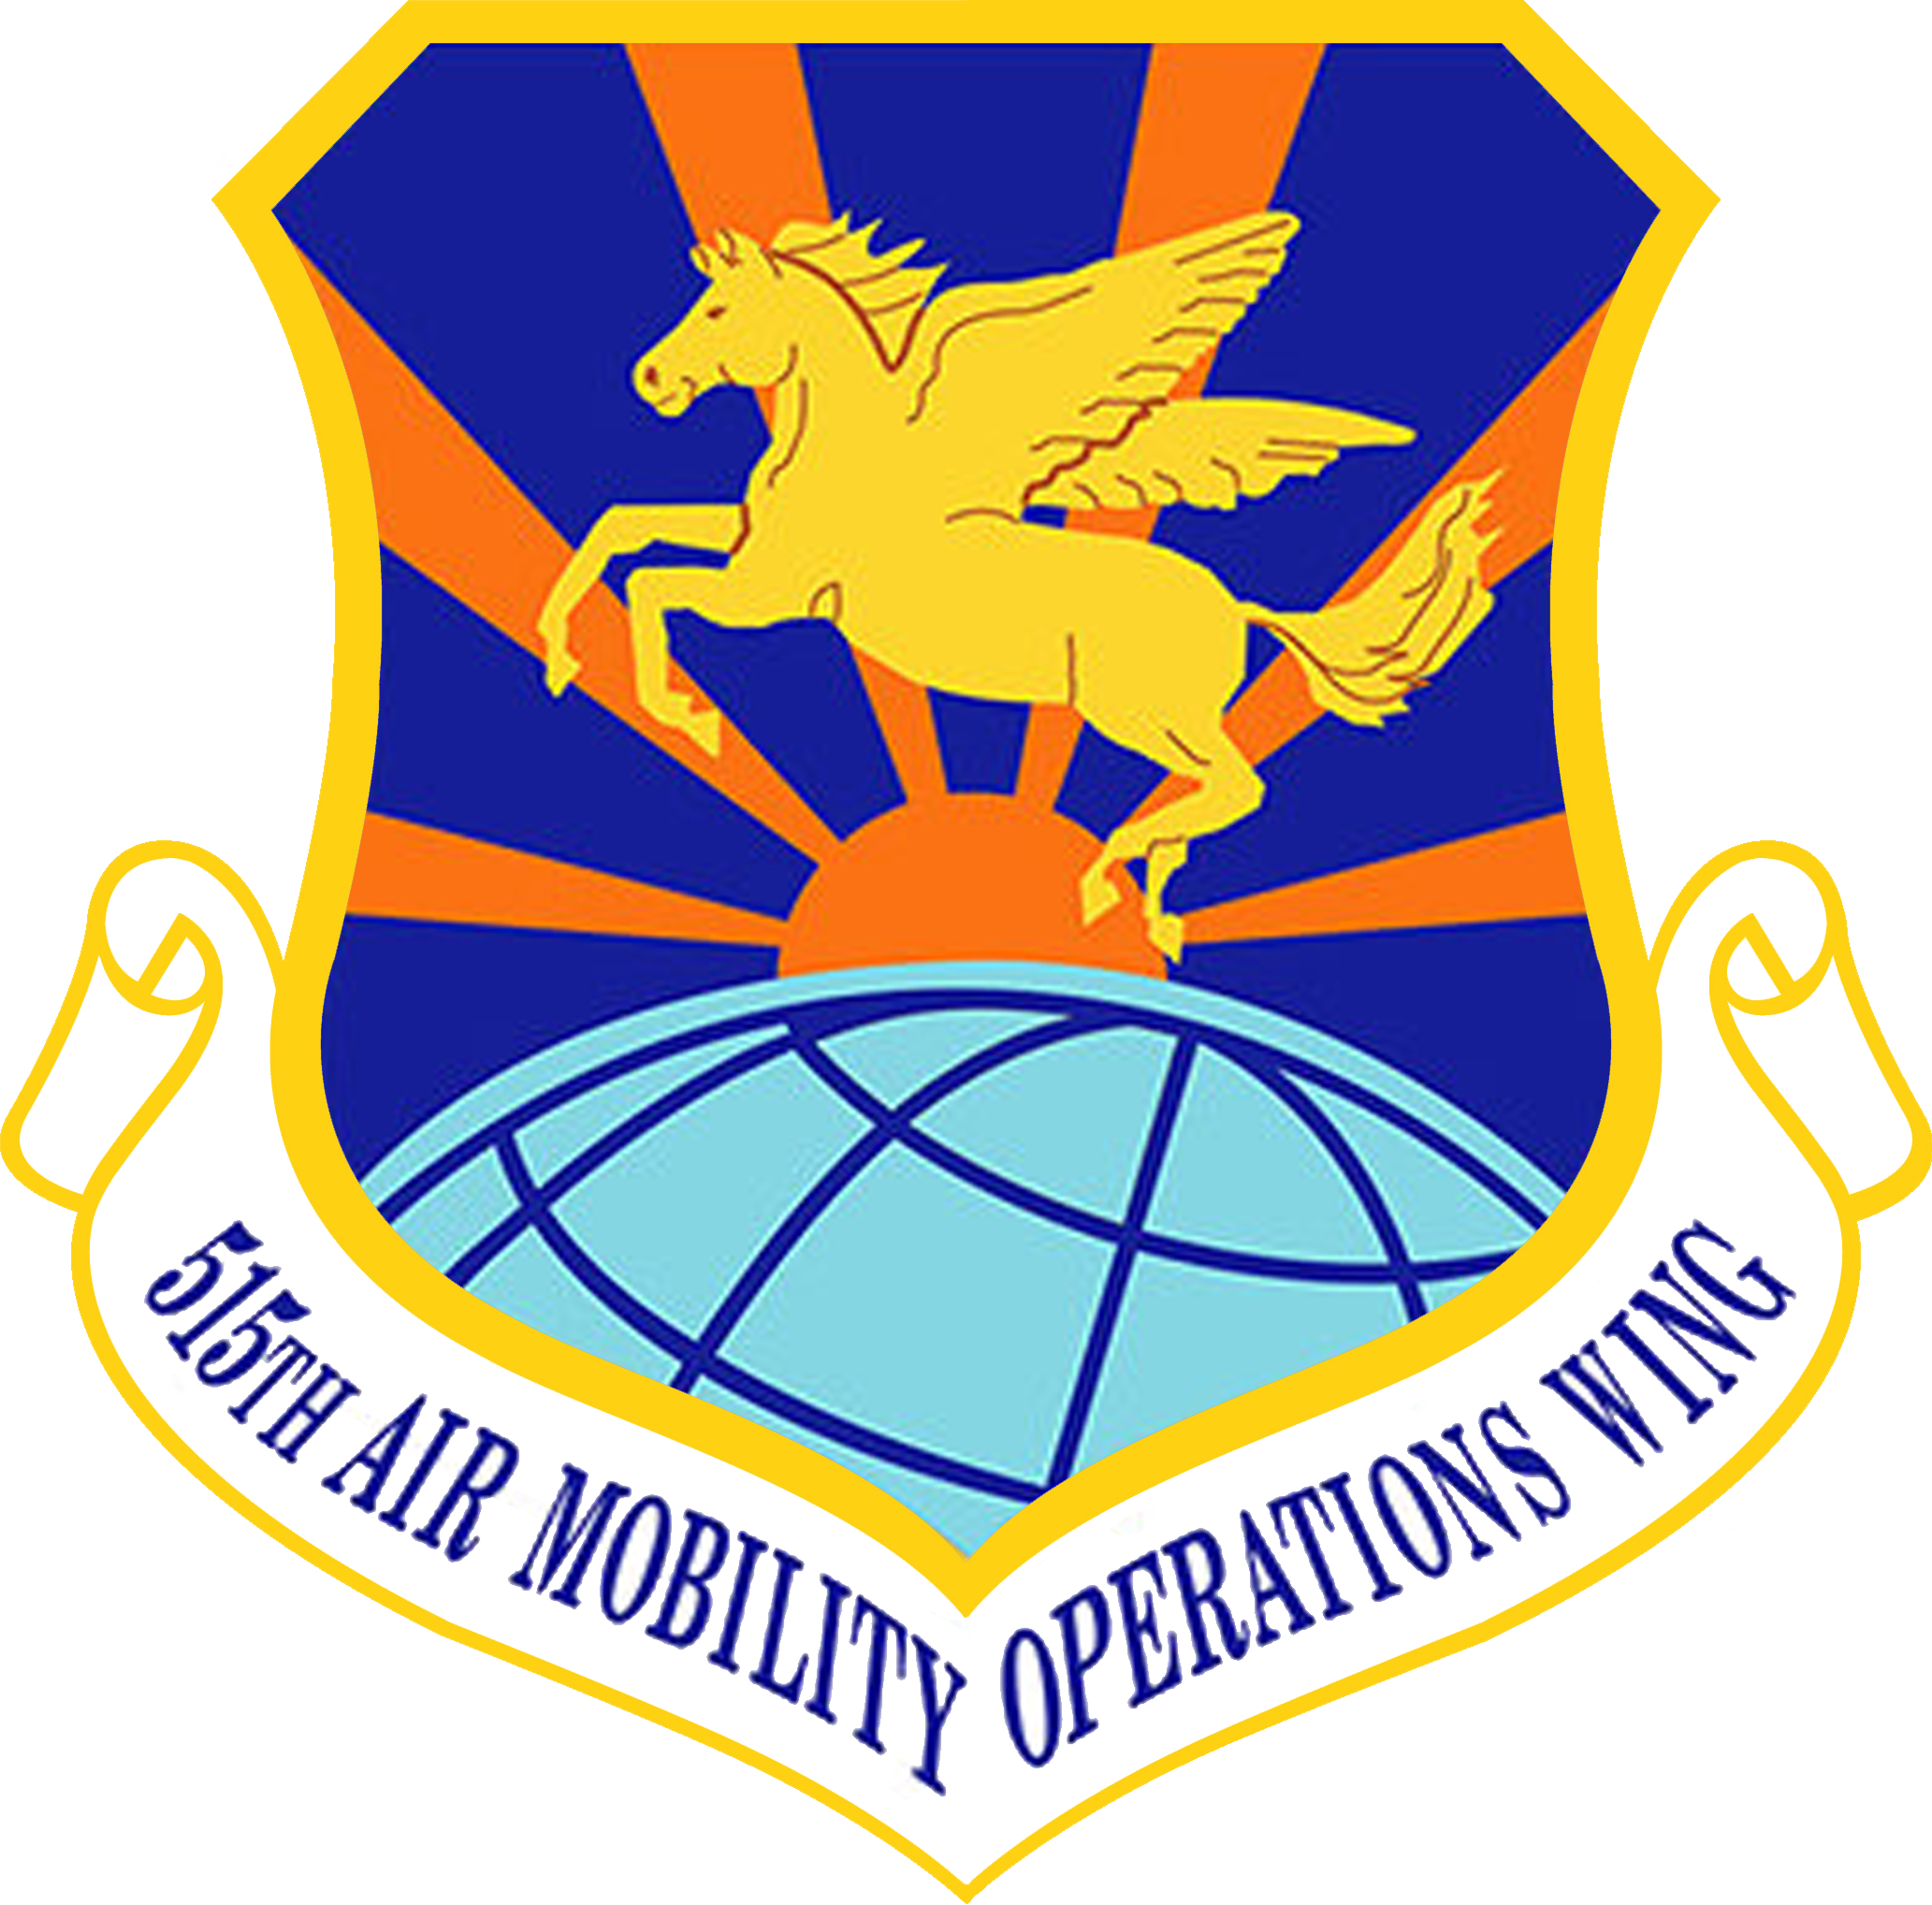 Download Full Image - Air Mobility Command Patch (2065x2036)